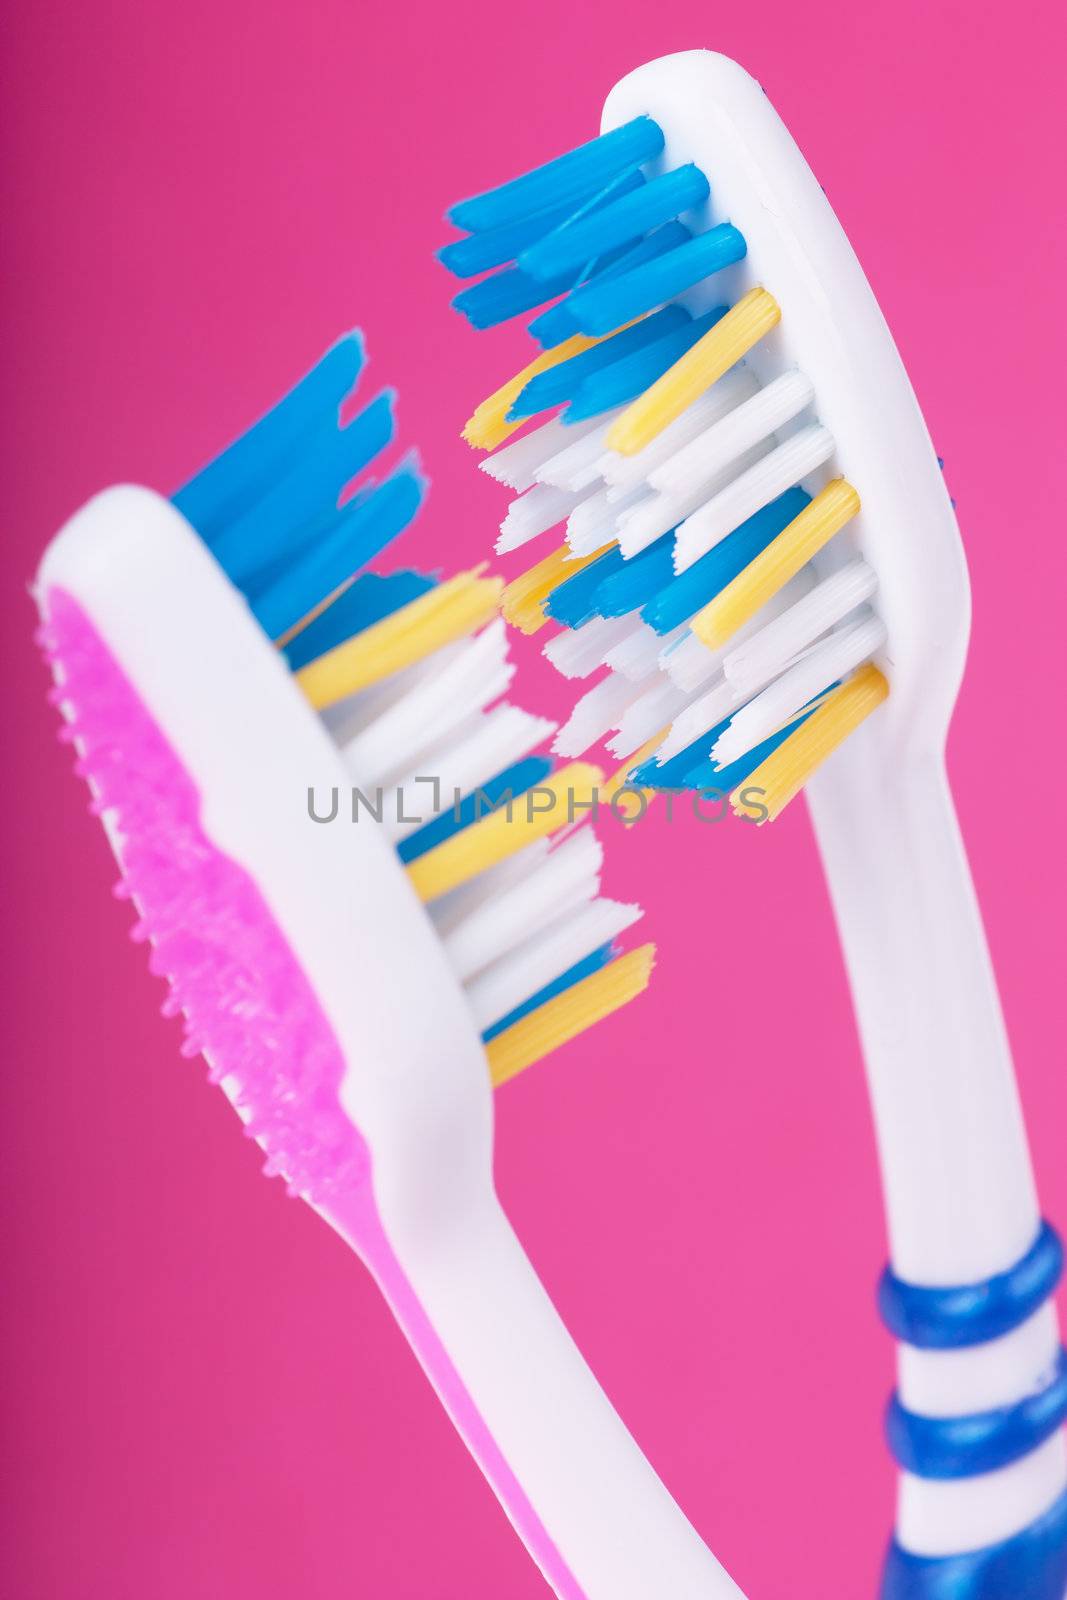 Toothbrushes by AGorohov